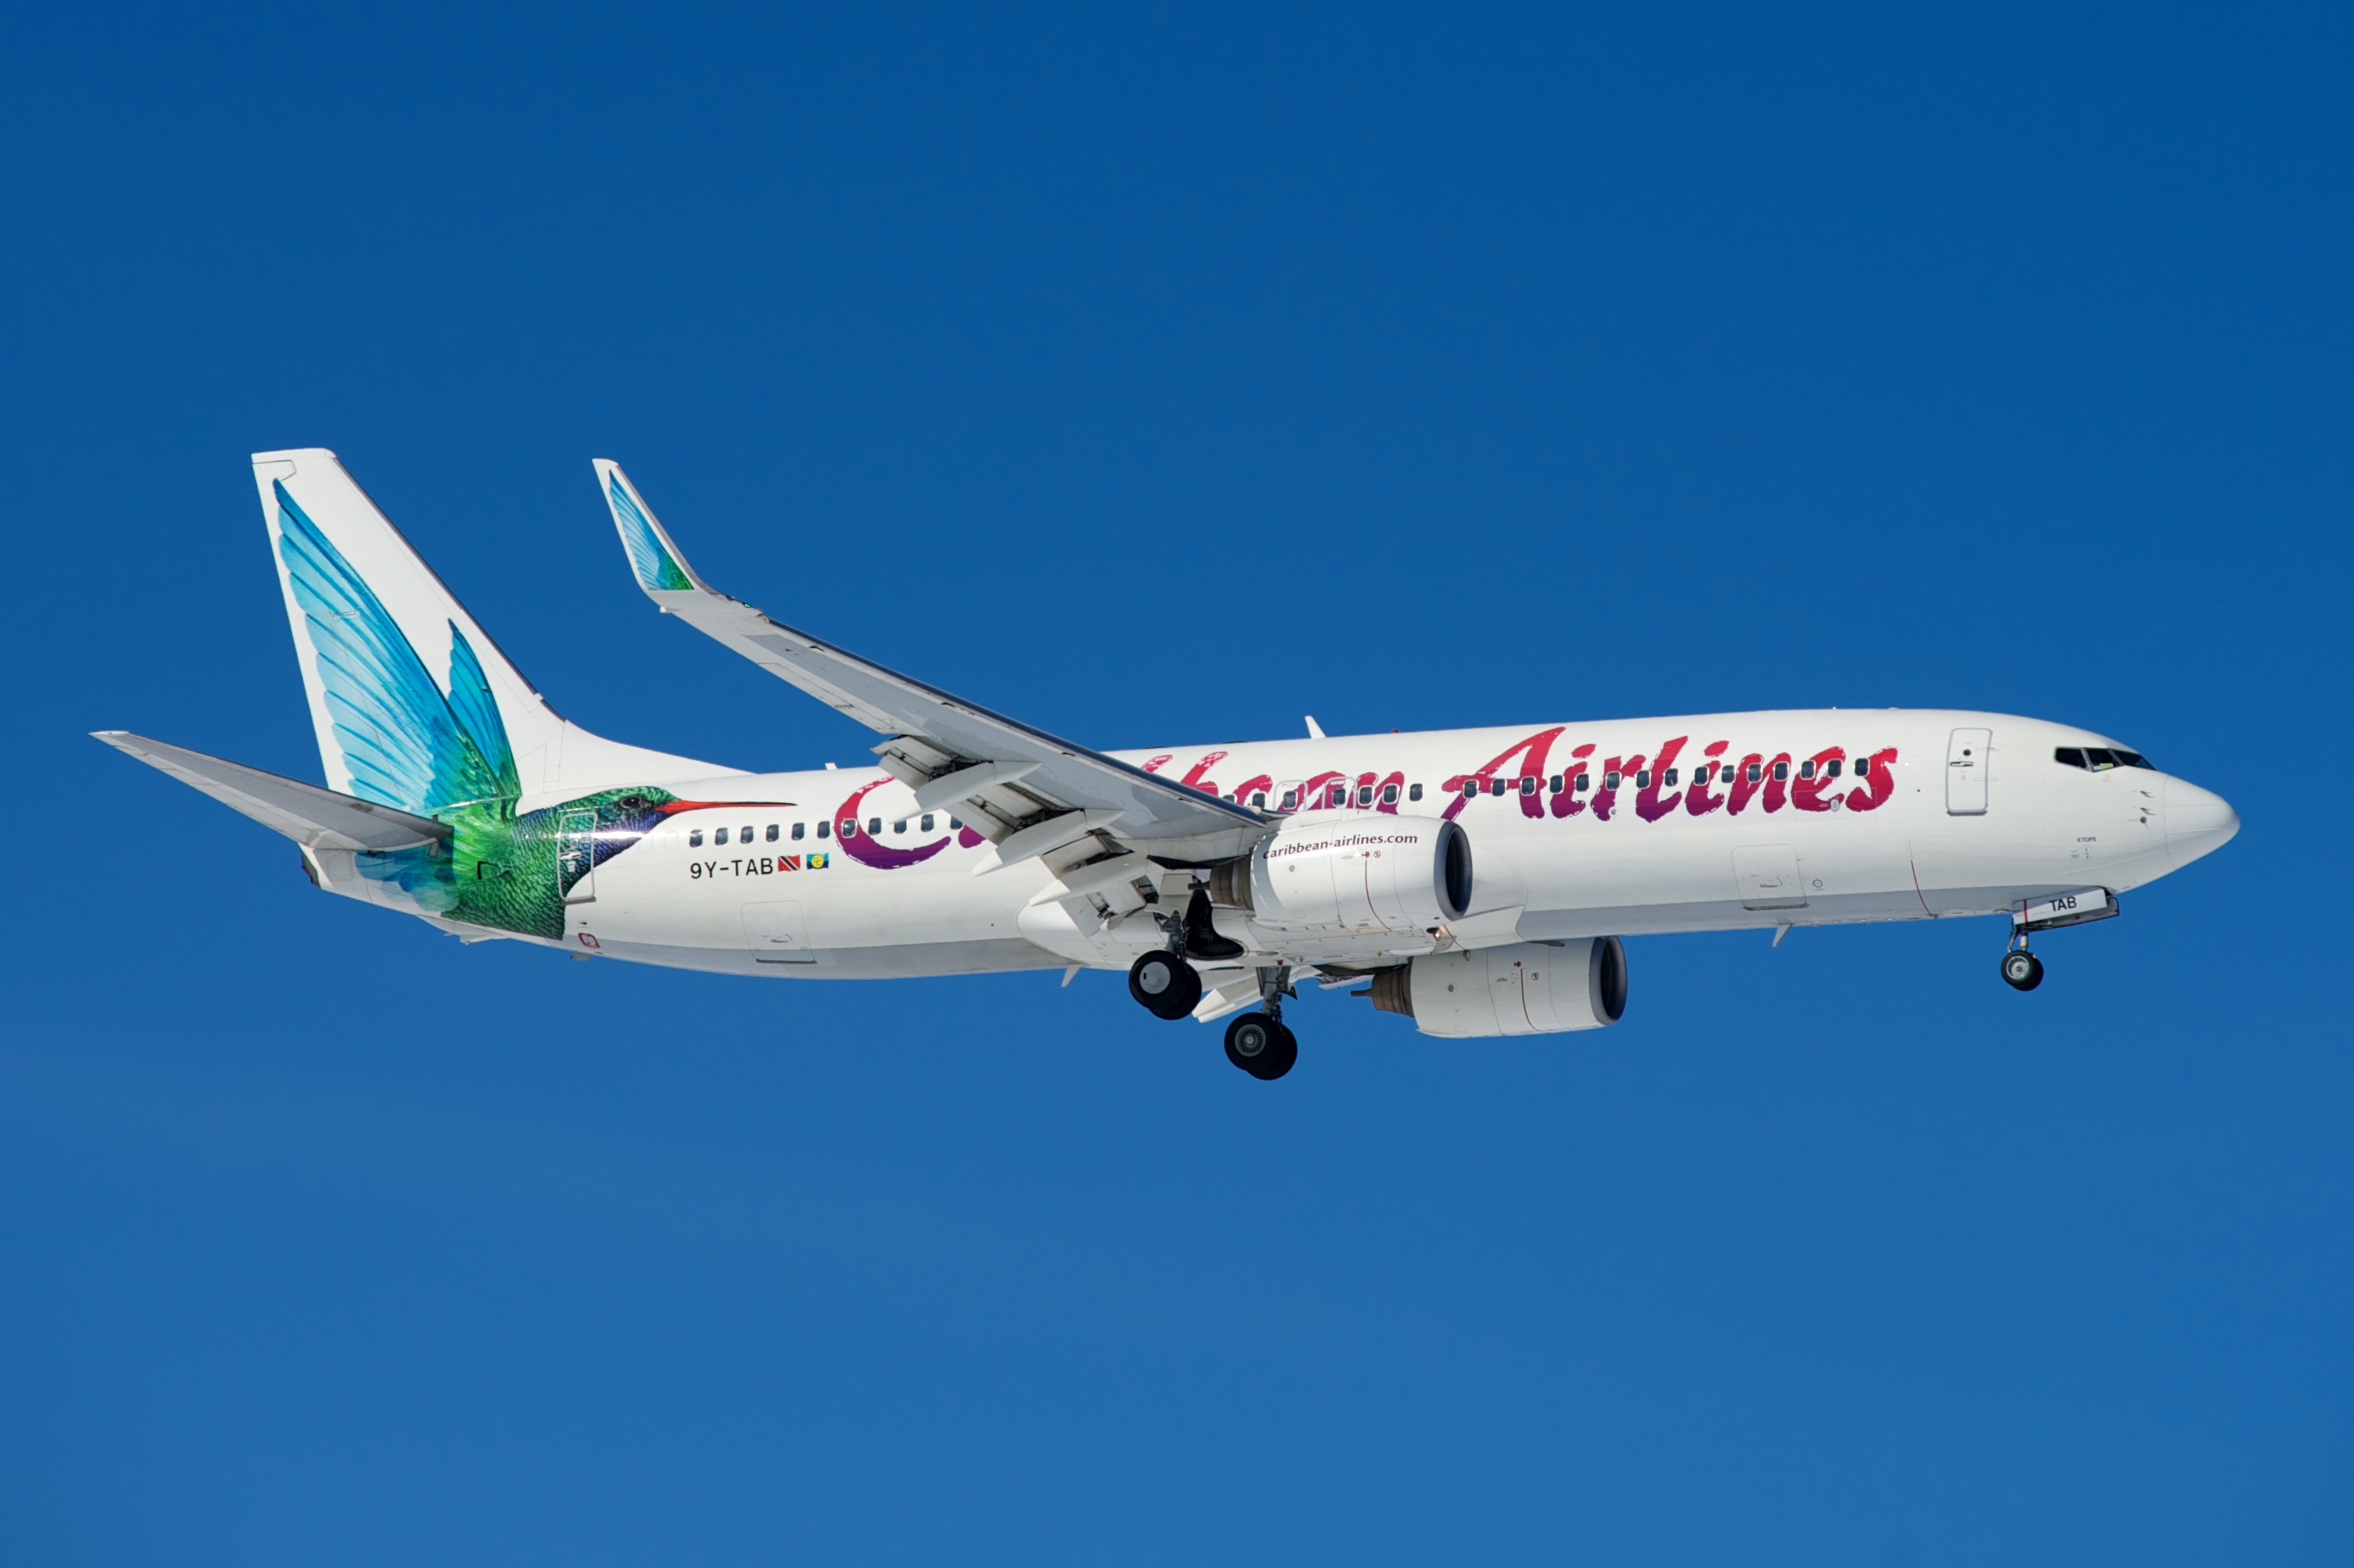 Caribbean Airlines plane